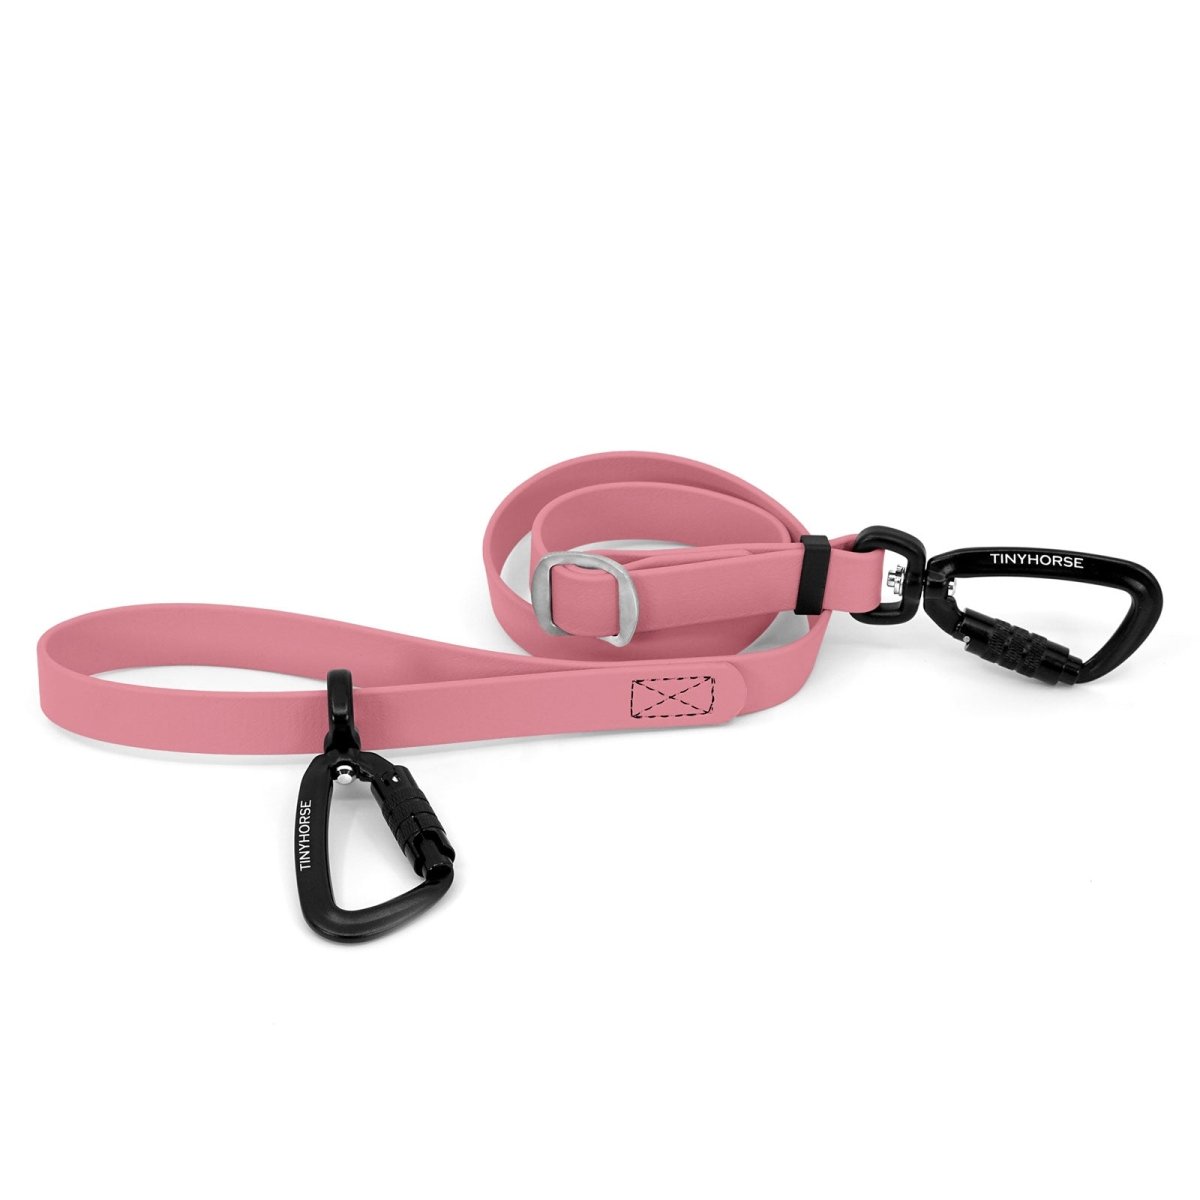 An adjustable baby pink-coloured Lead-All Pro made of BioThane with 2 auto-locking carabiners